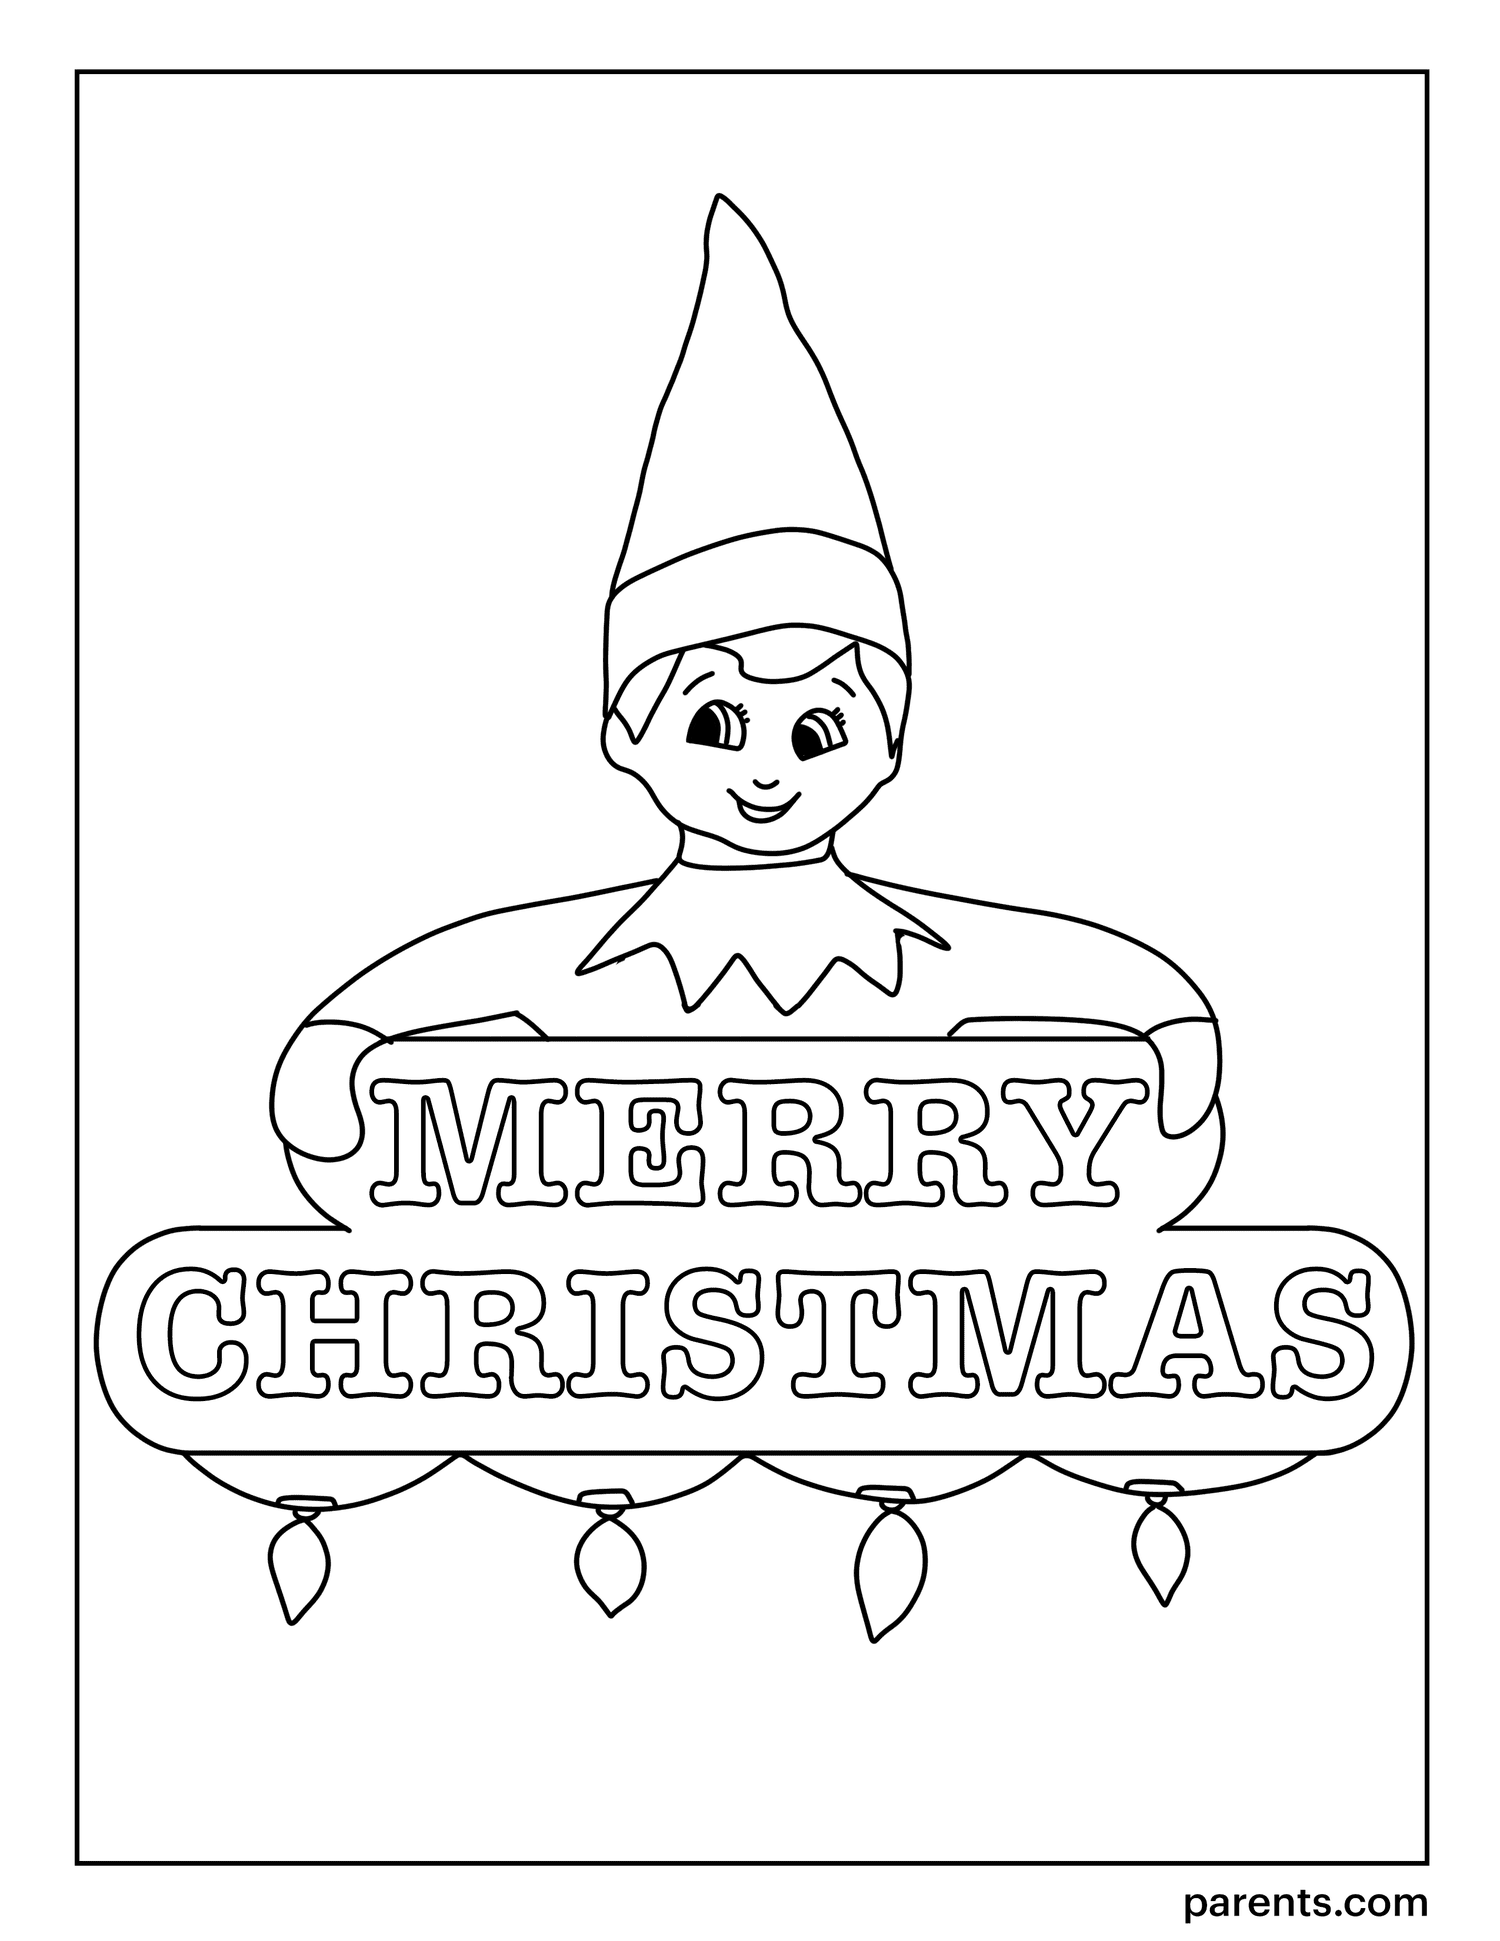 20 Elf on the Shelf Inspired Coloring Pages to Get Kids Excited for ...